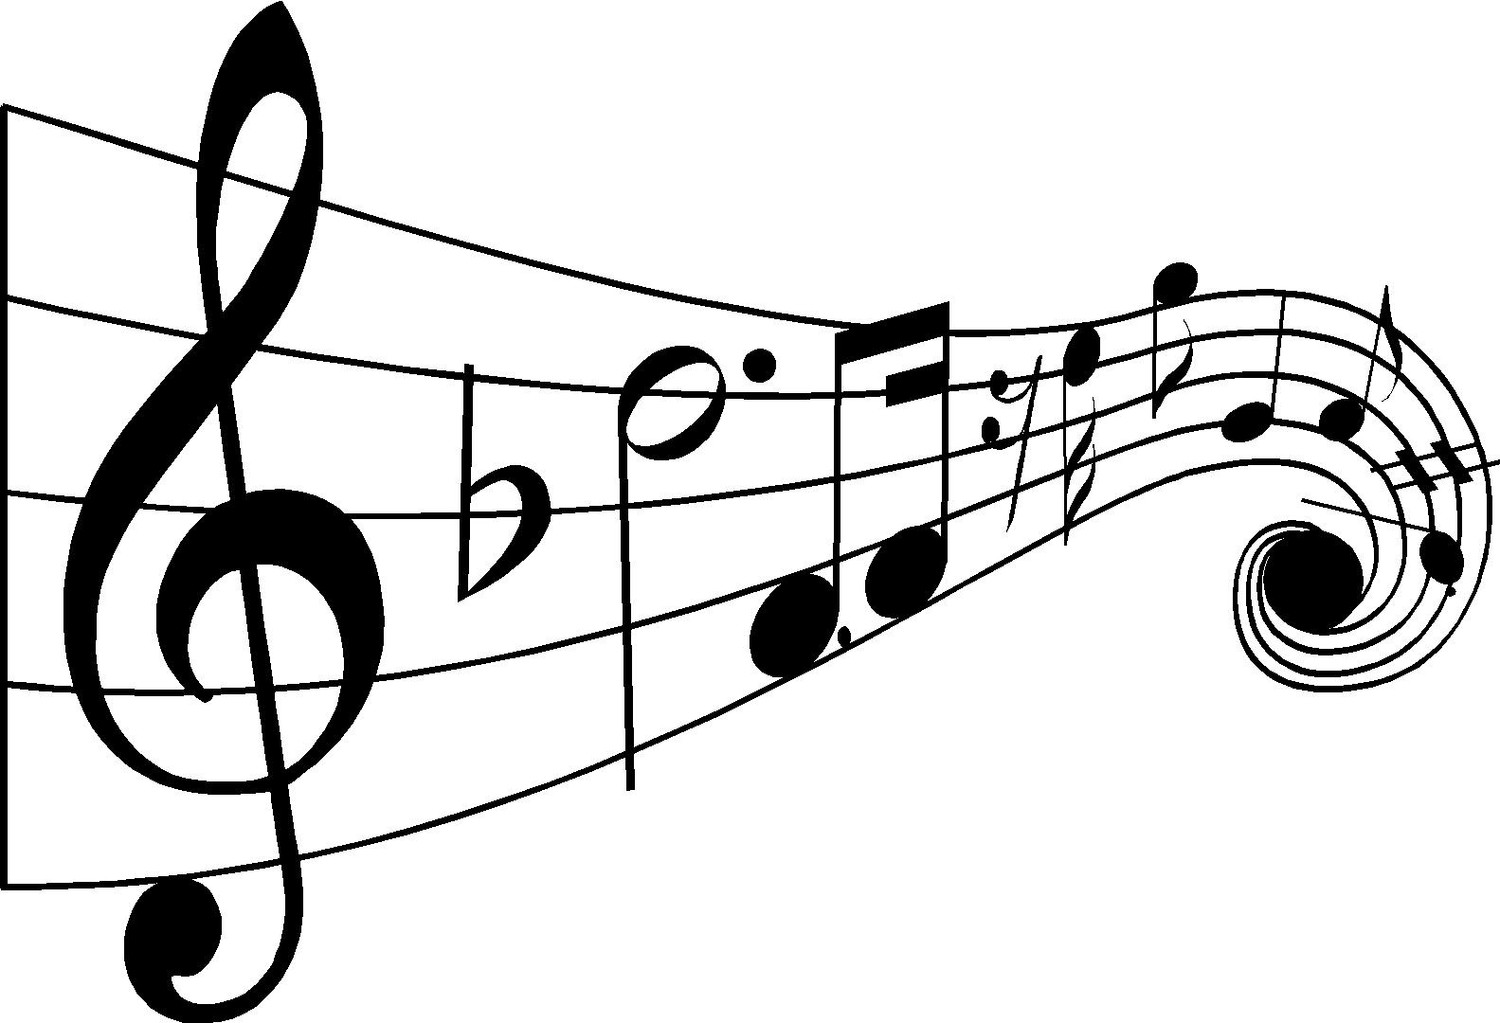 Coloring pages of music notes - Coloring Pages  Pictures - IMAGIXS